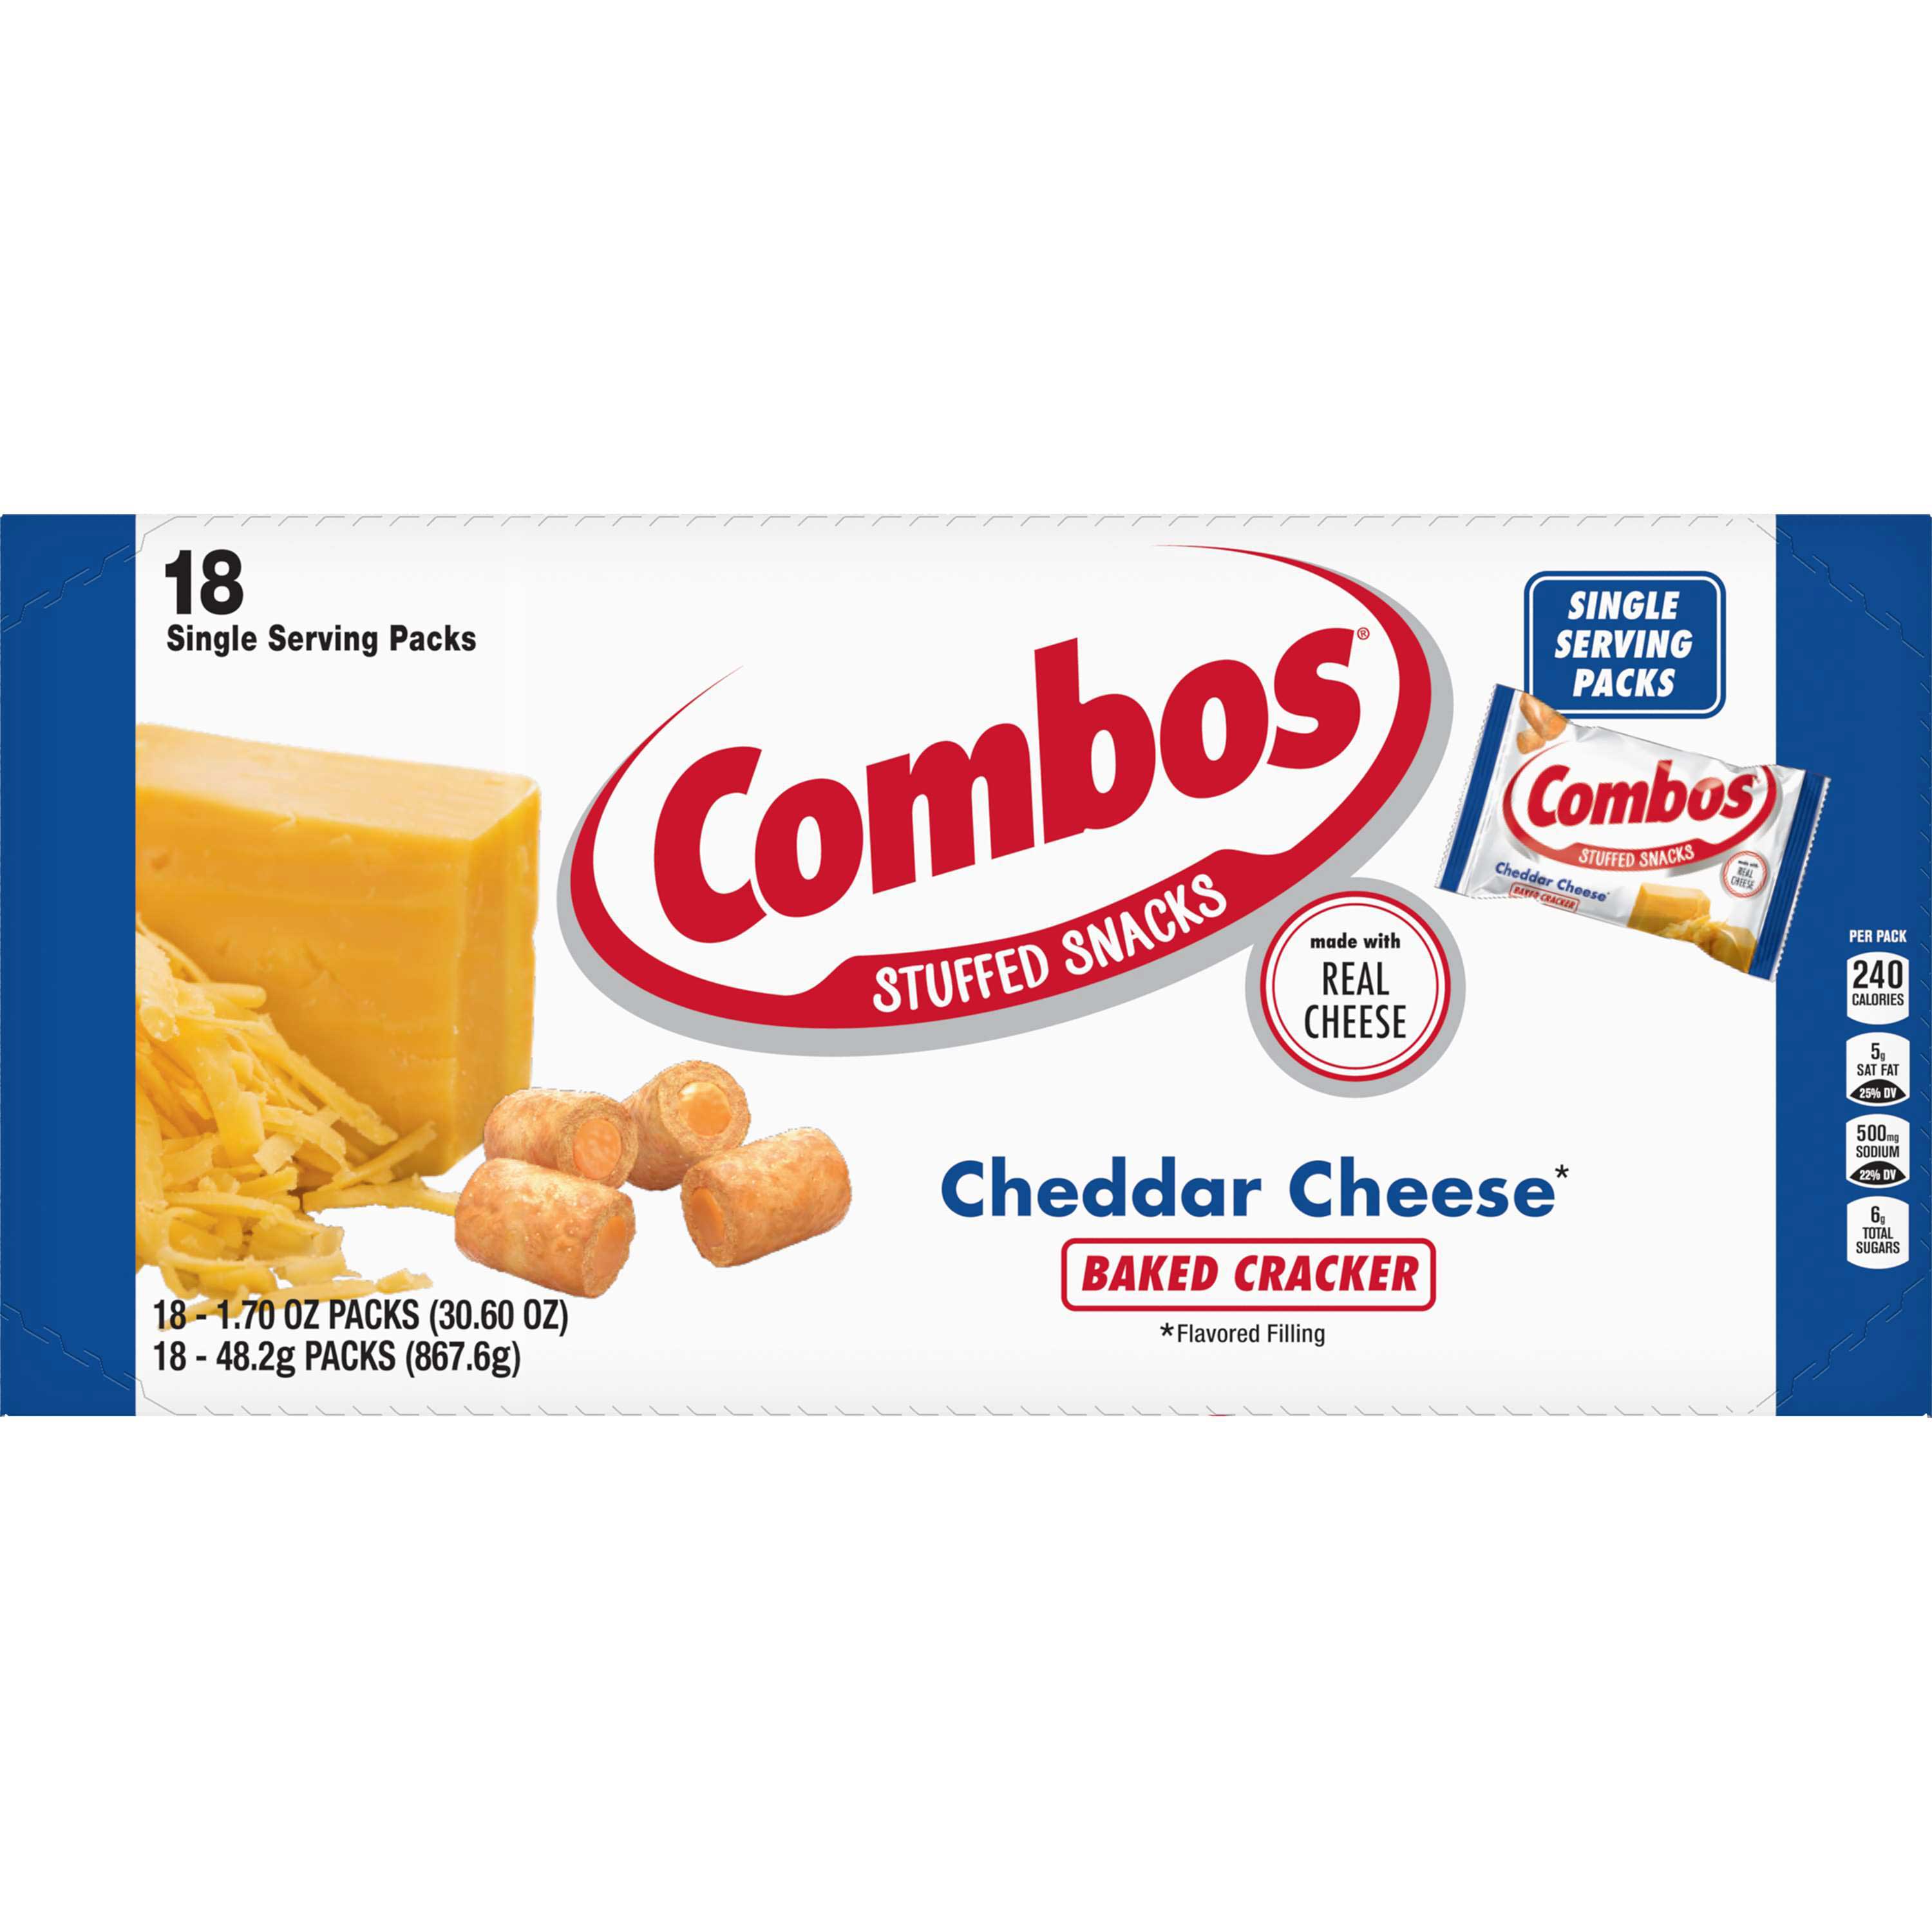 Combos Cheddar Cheese Cracker Baked Snack Case